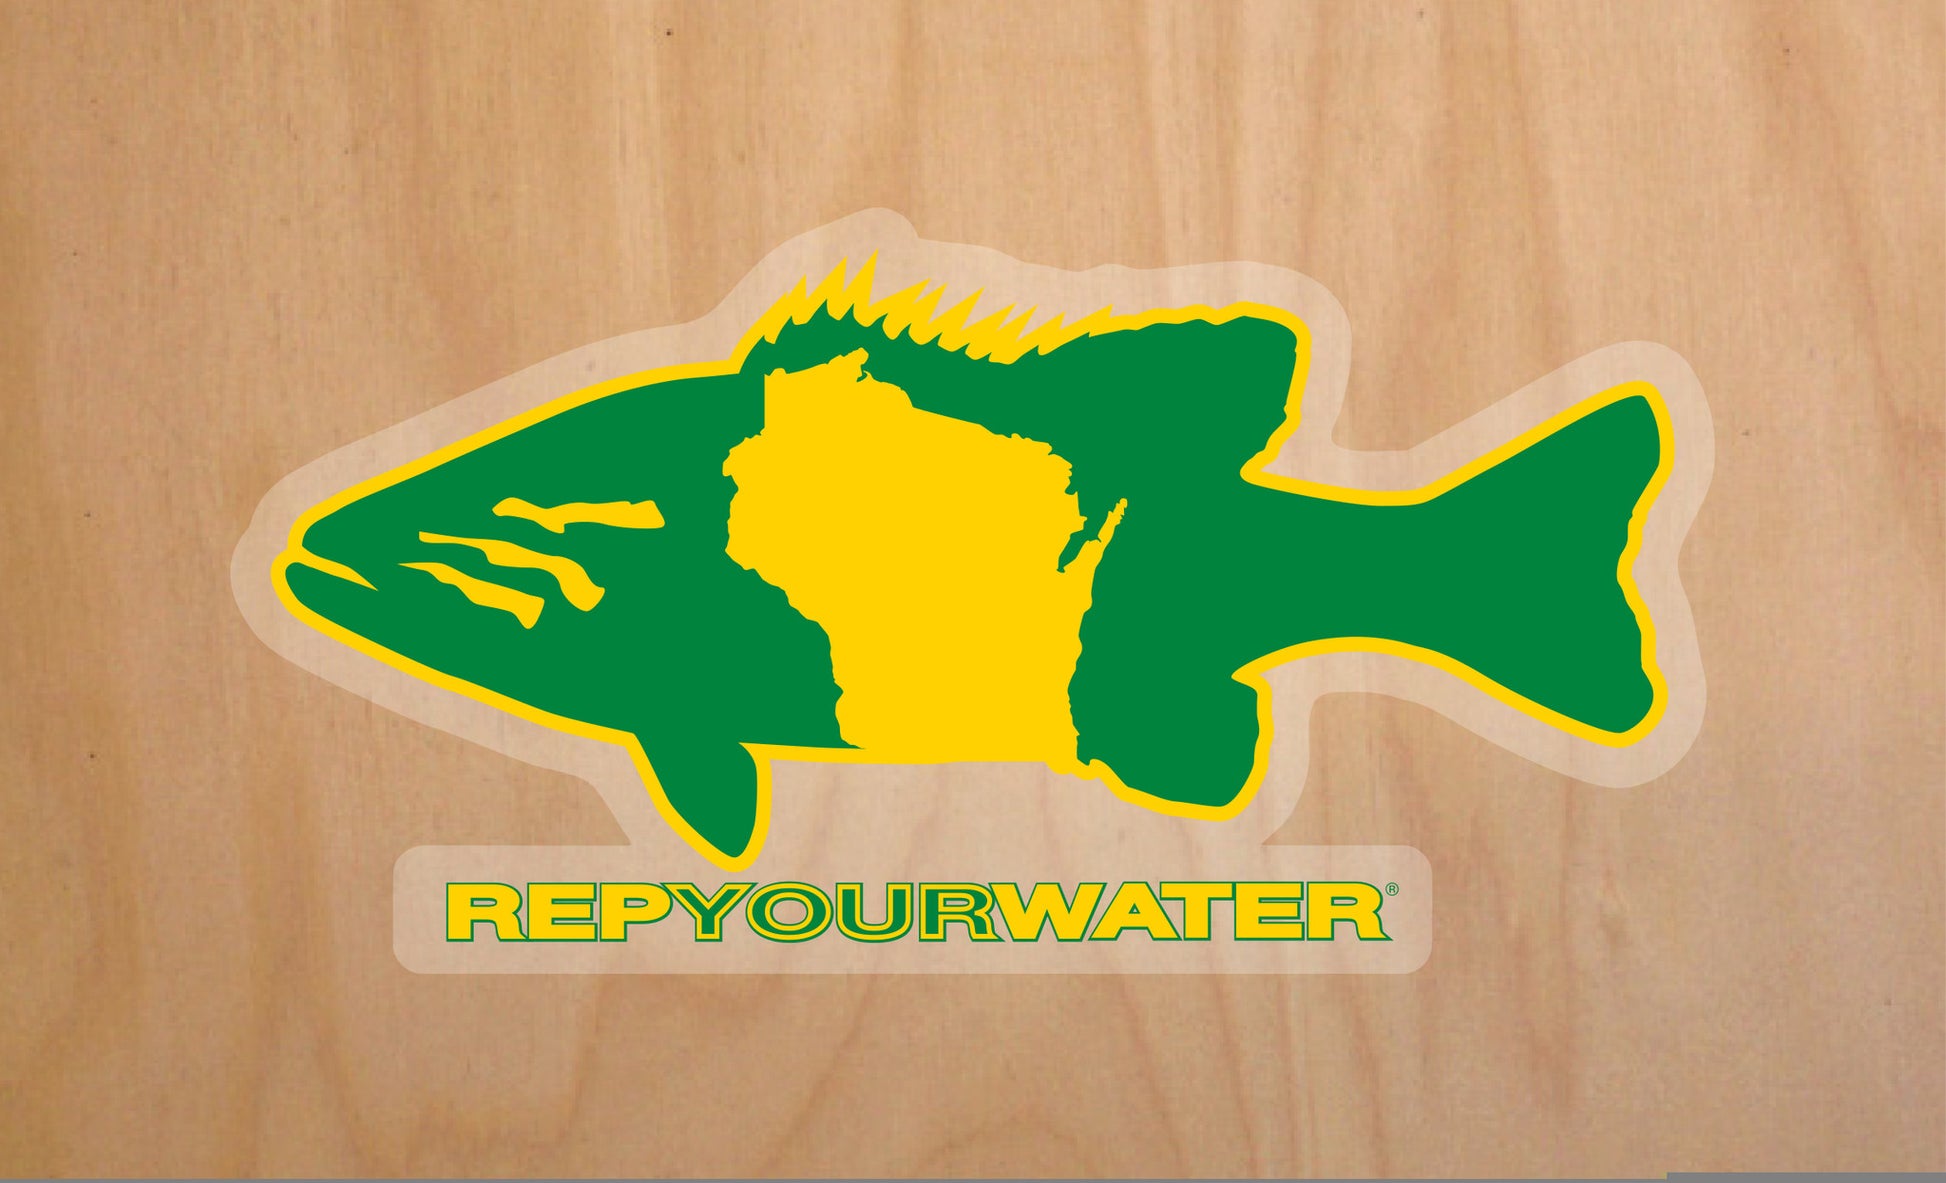 A sticker of a bass with the shape of wisconsin inside of it and the words repyourwater beneath it is on a wood background